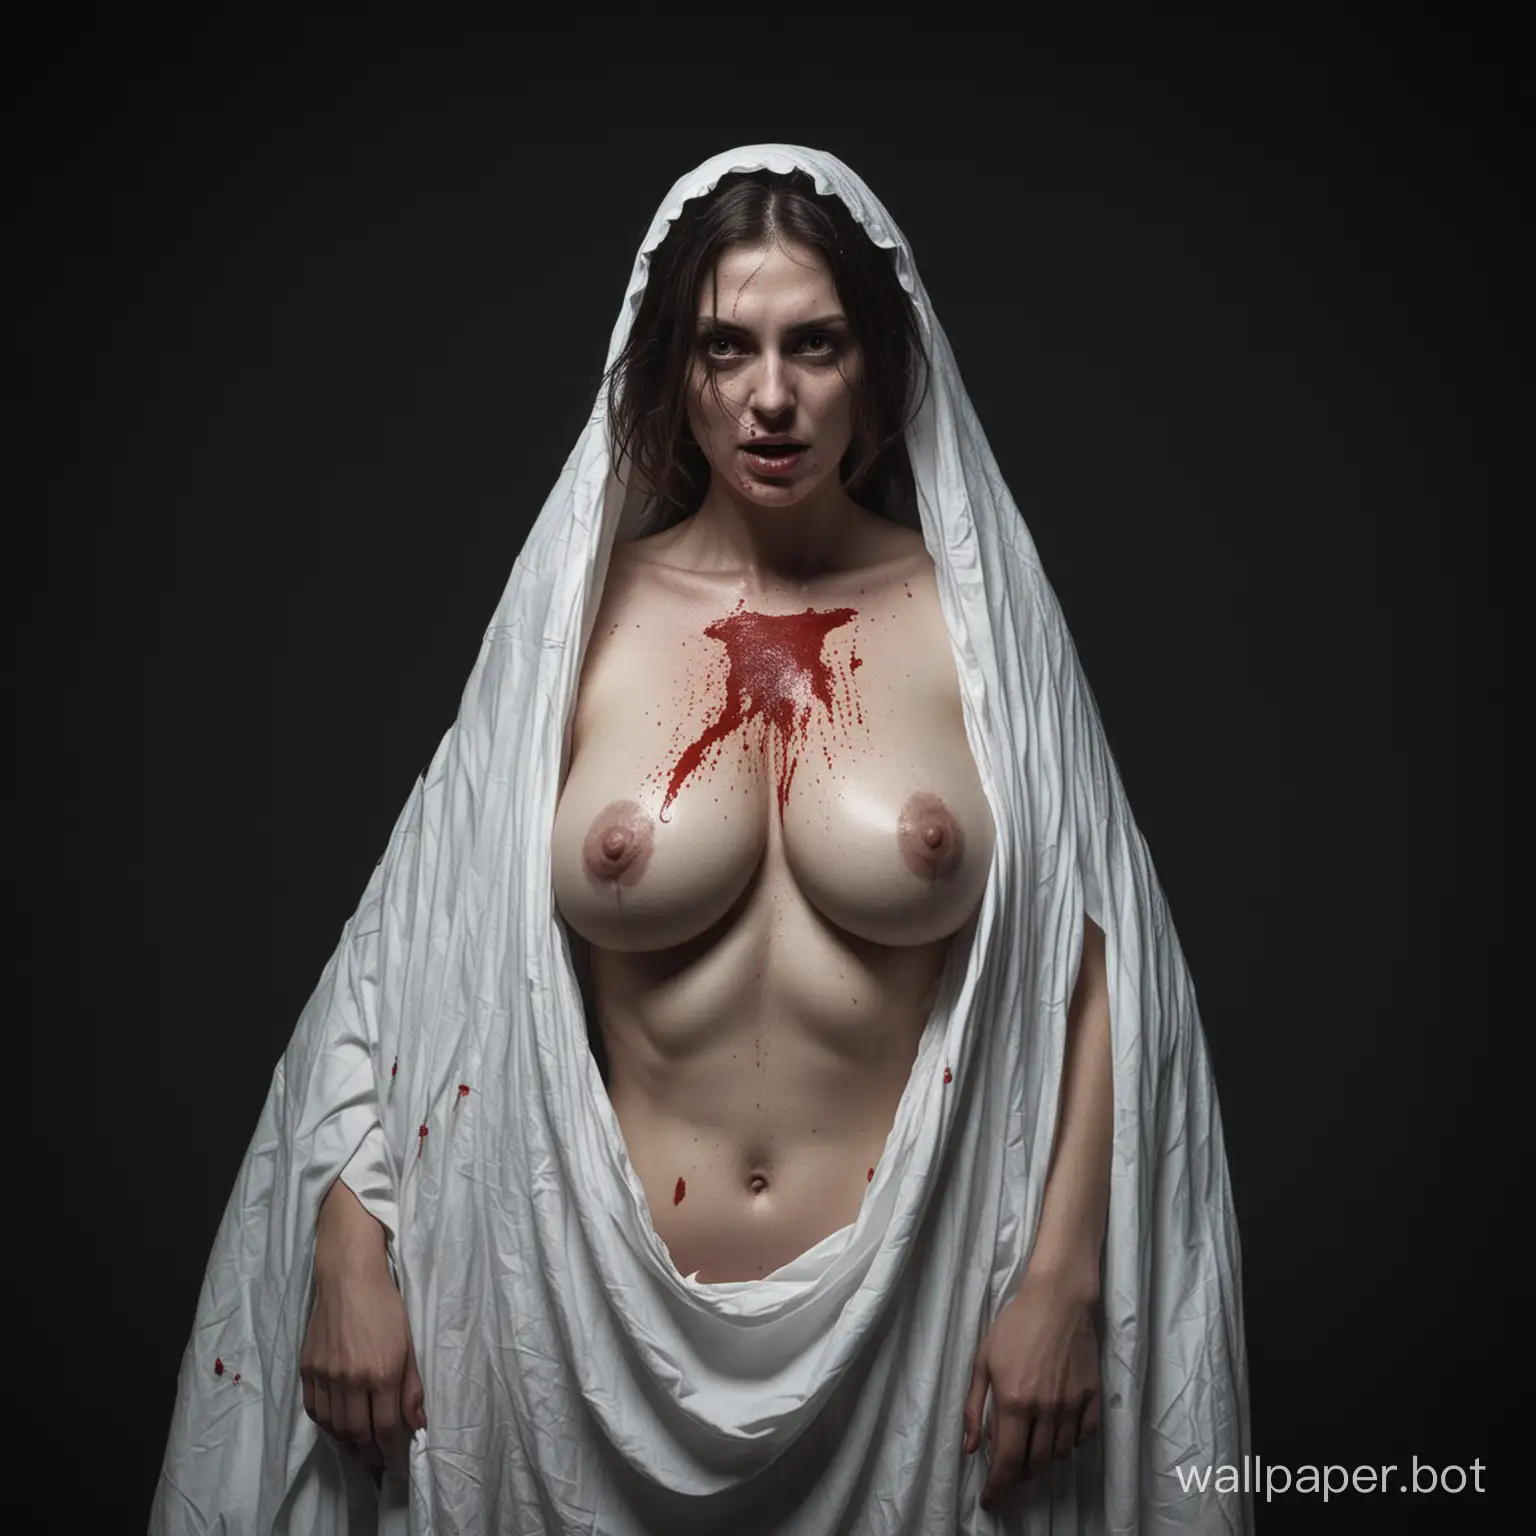 bloodied ghost of a woman with large breasts in a sheet on a black background